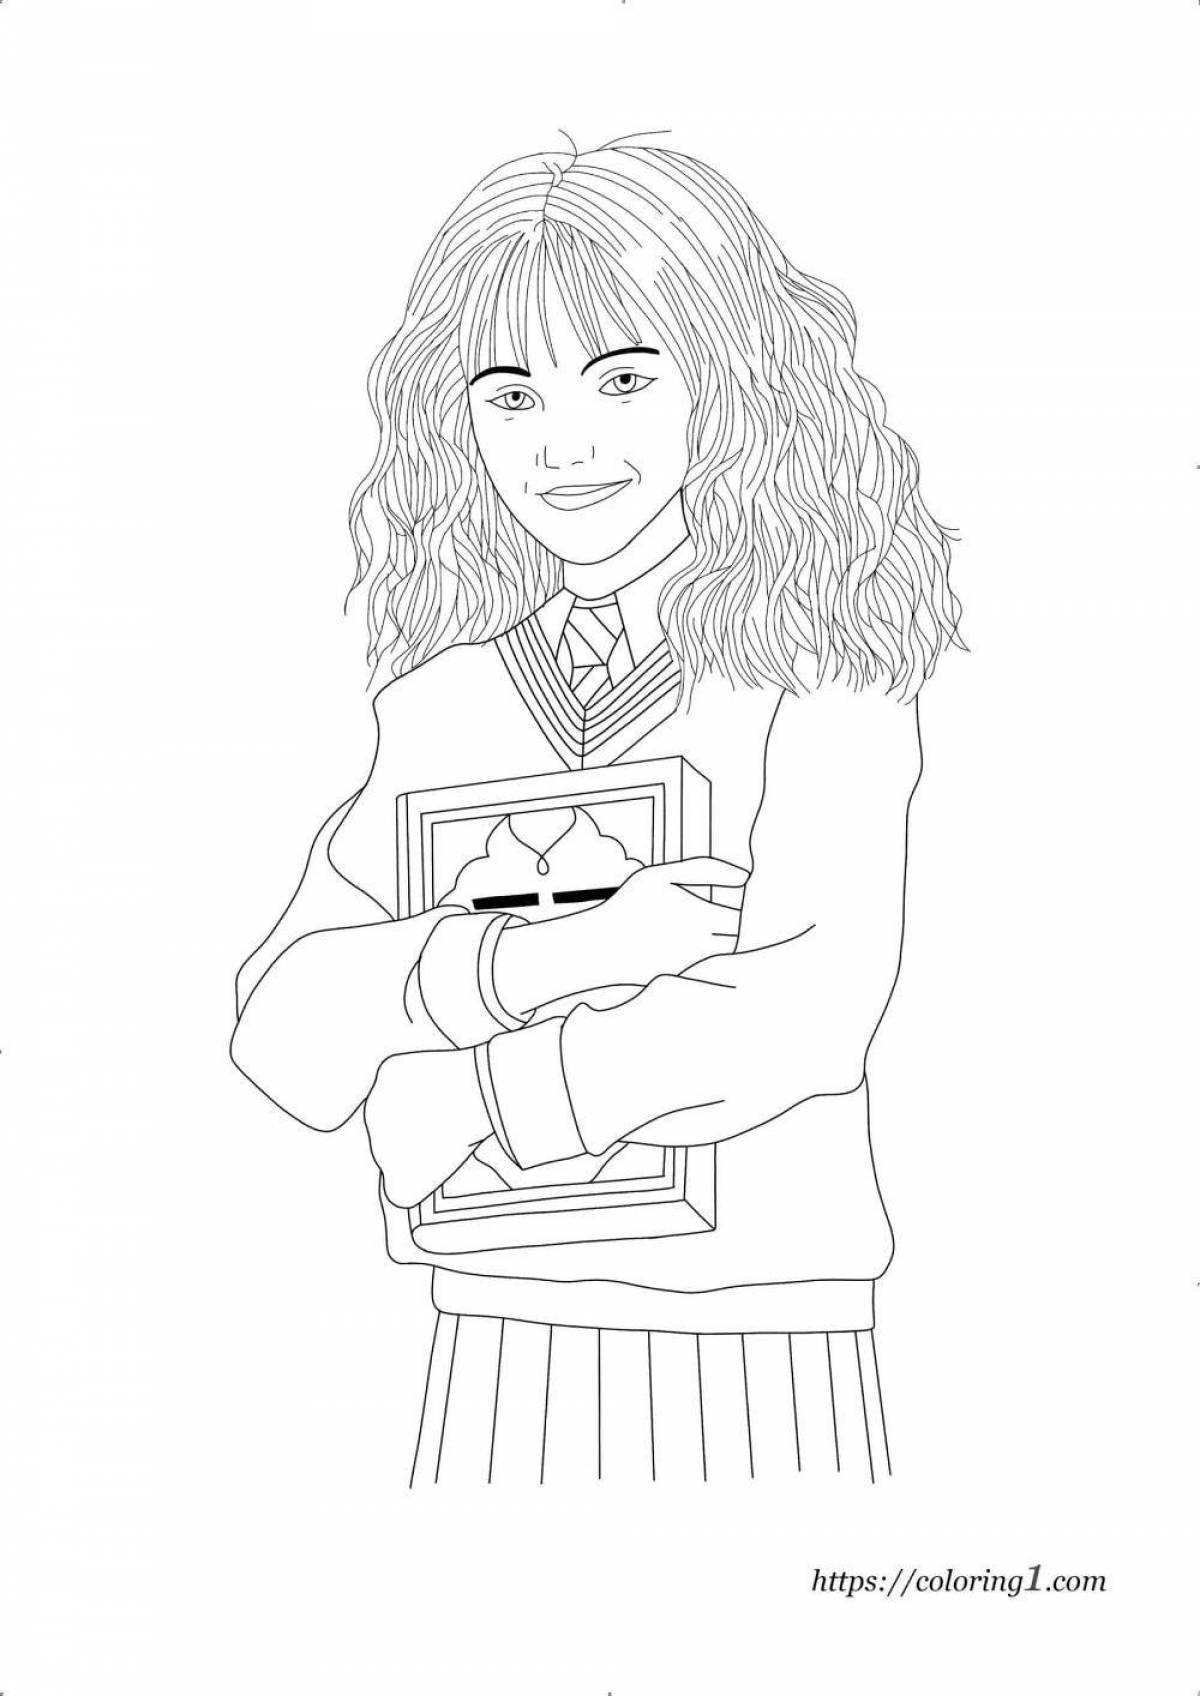 Hermione granger coloring book